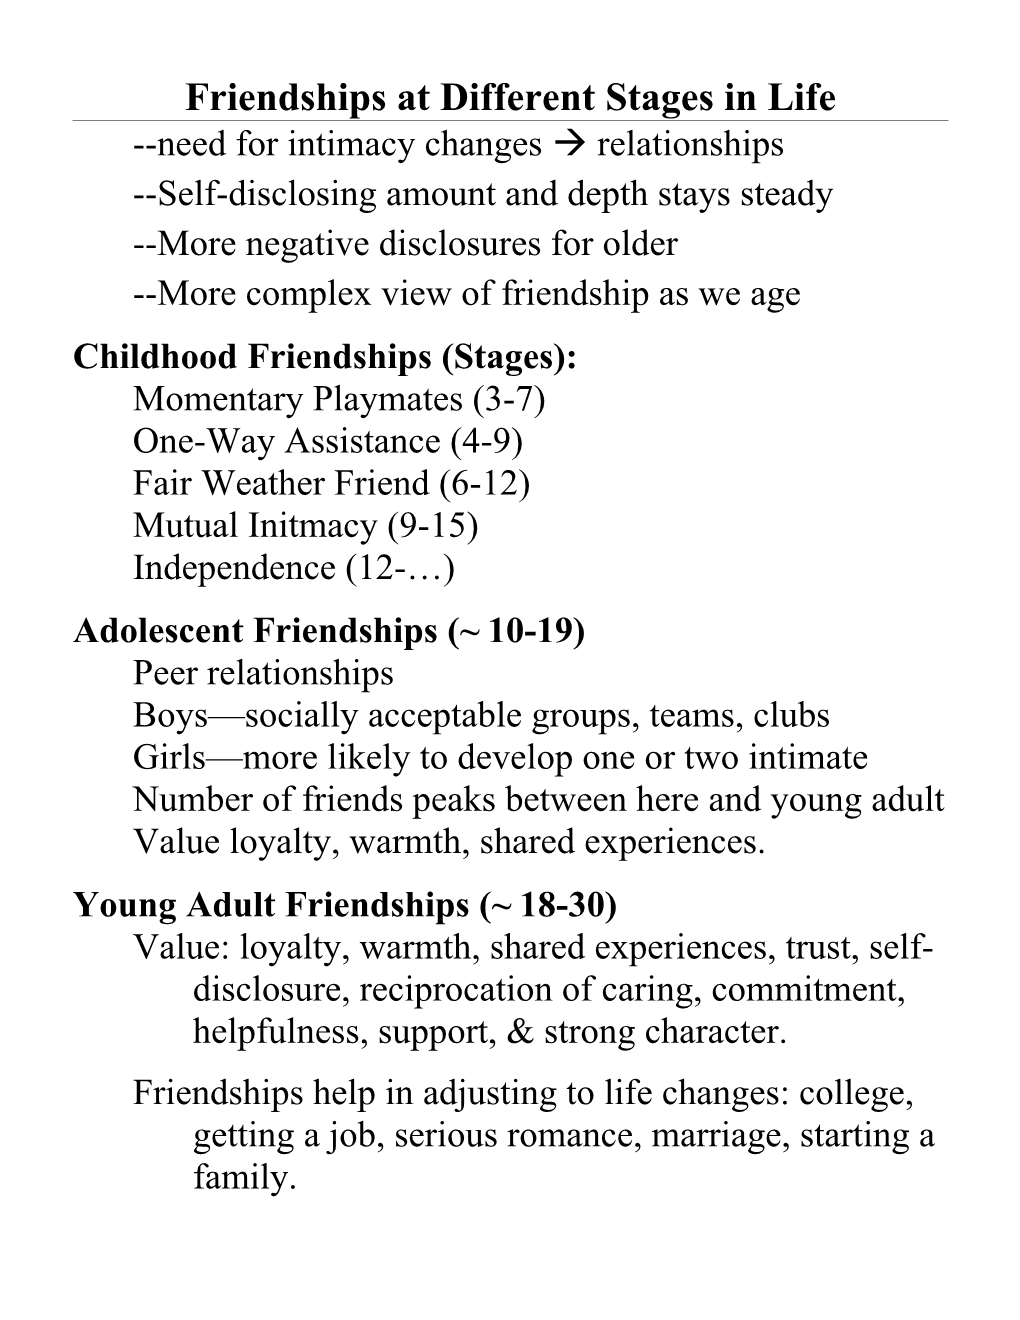 Childhood Friendships (Stages)